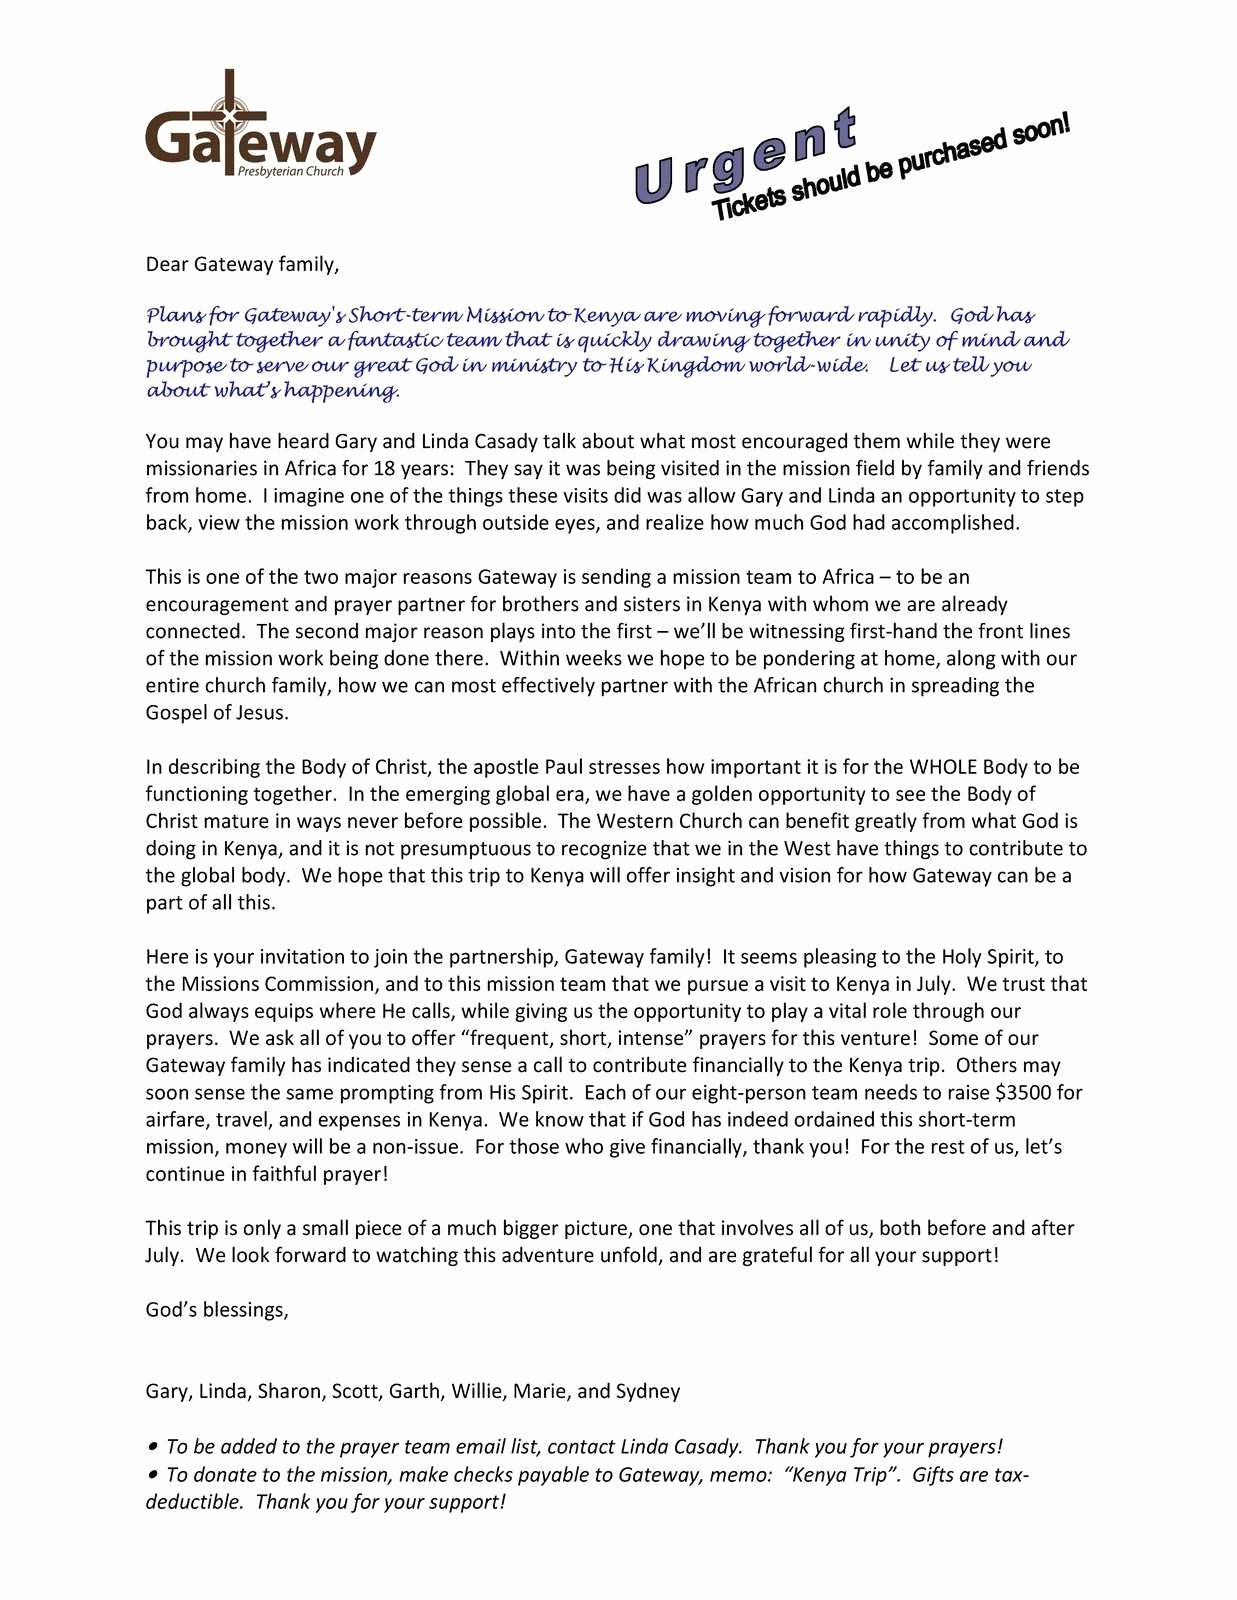 Sample Fundraising Letter for Mission Trip Inspirational Mission Trip Letter Template Support Collection